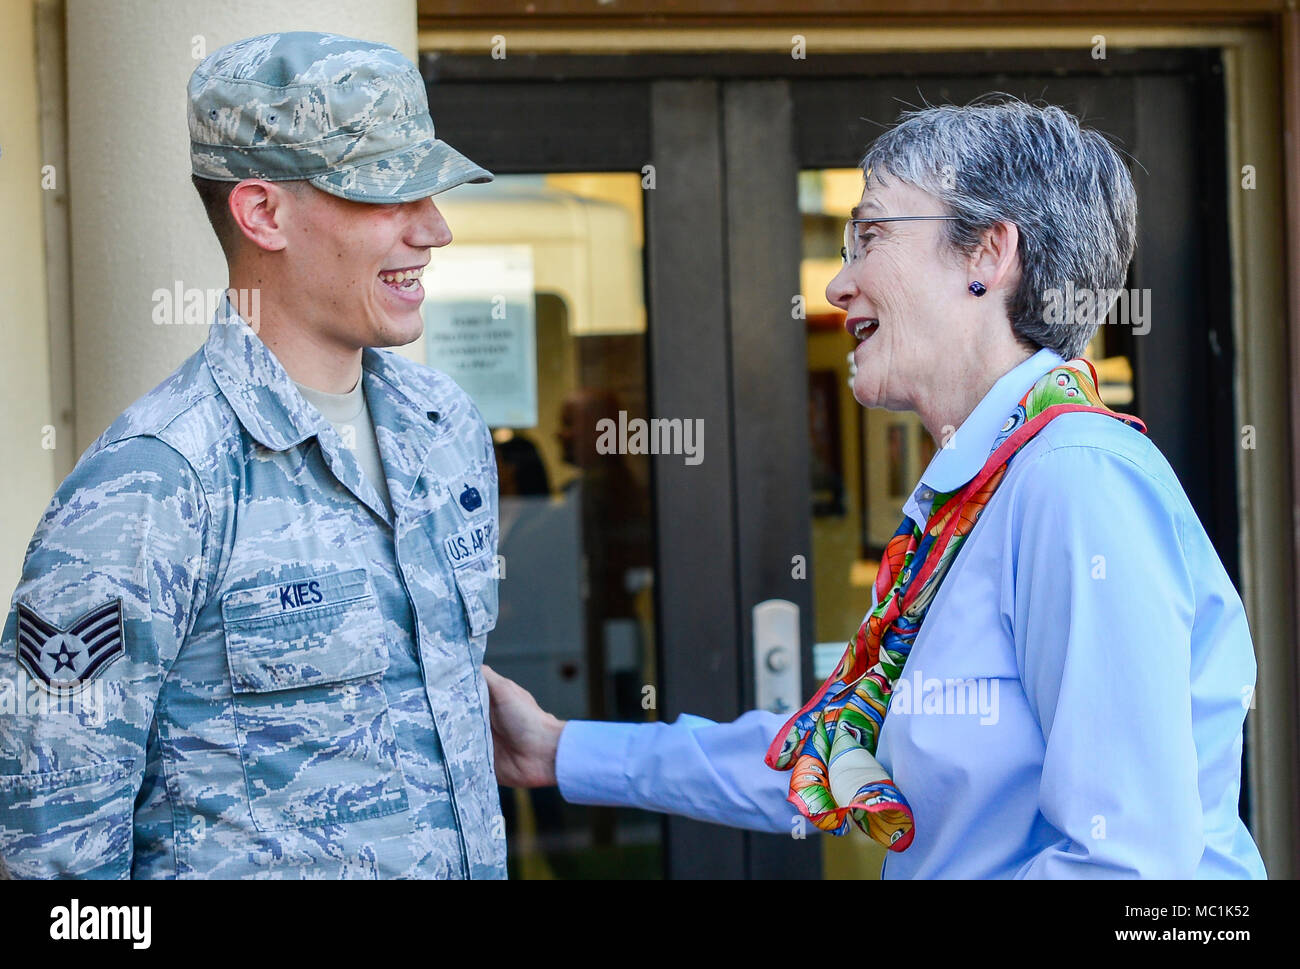 Secretary of the Air Force Heather Wilson speaks to Staff Sgt. Anthony Kies, 644th Combat Communications Squadron, during a base visit at Andersen Air Force Base, Guam, Jan. 25, 2018. During the tour, Wilson reiterated the importance of readiness, modernization and innovations to remain the greatest Air Force in the world. (U.S. Air Force photo by Airman 1st Class Christopher Quail) Stock Photo